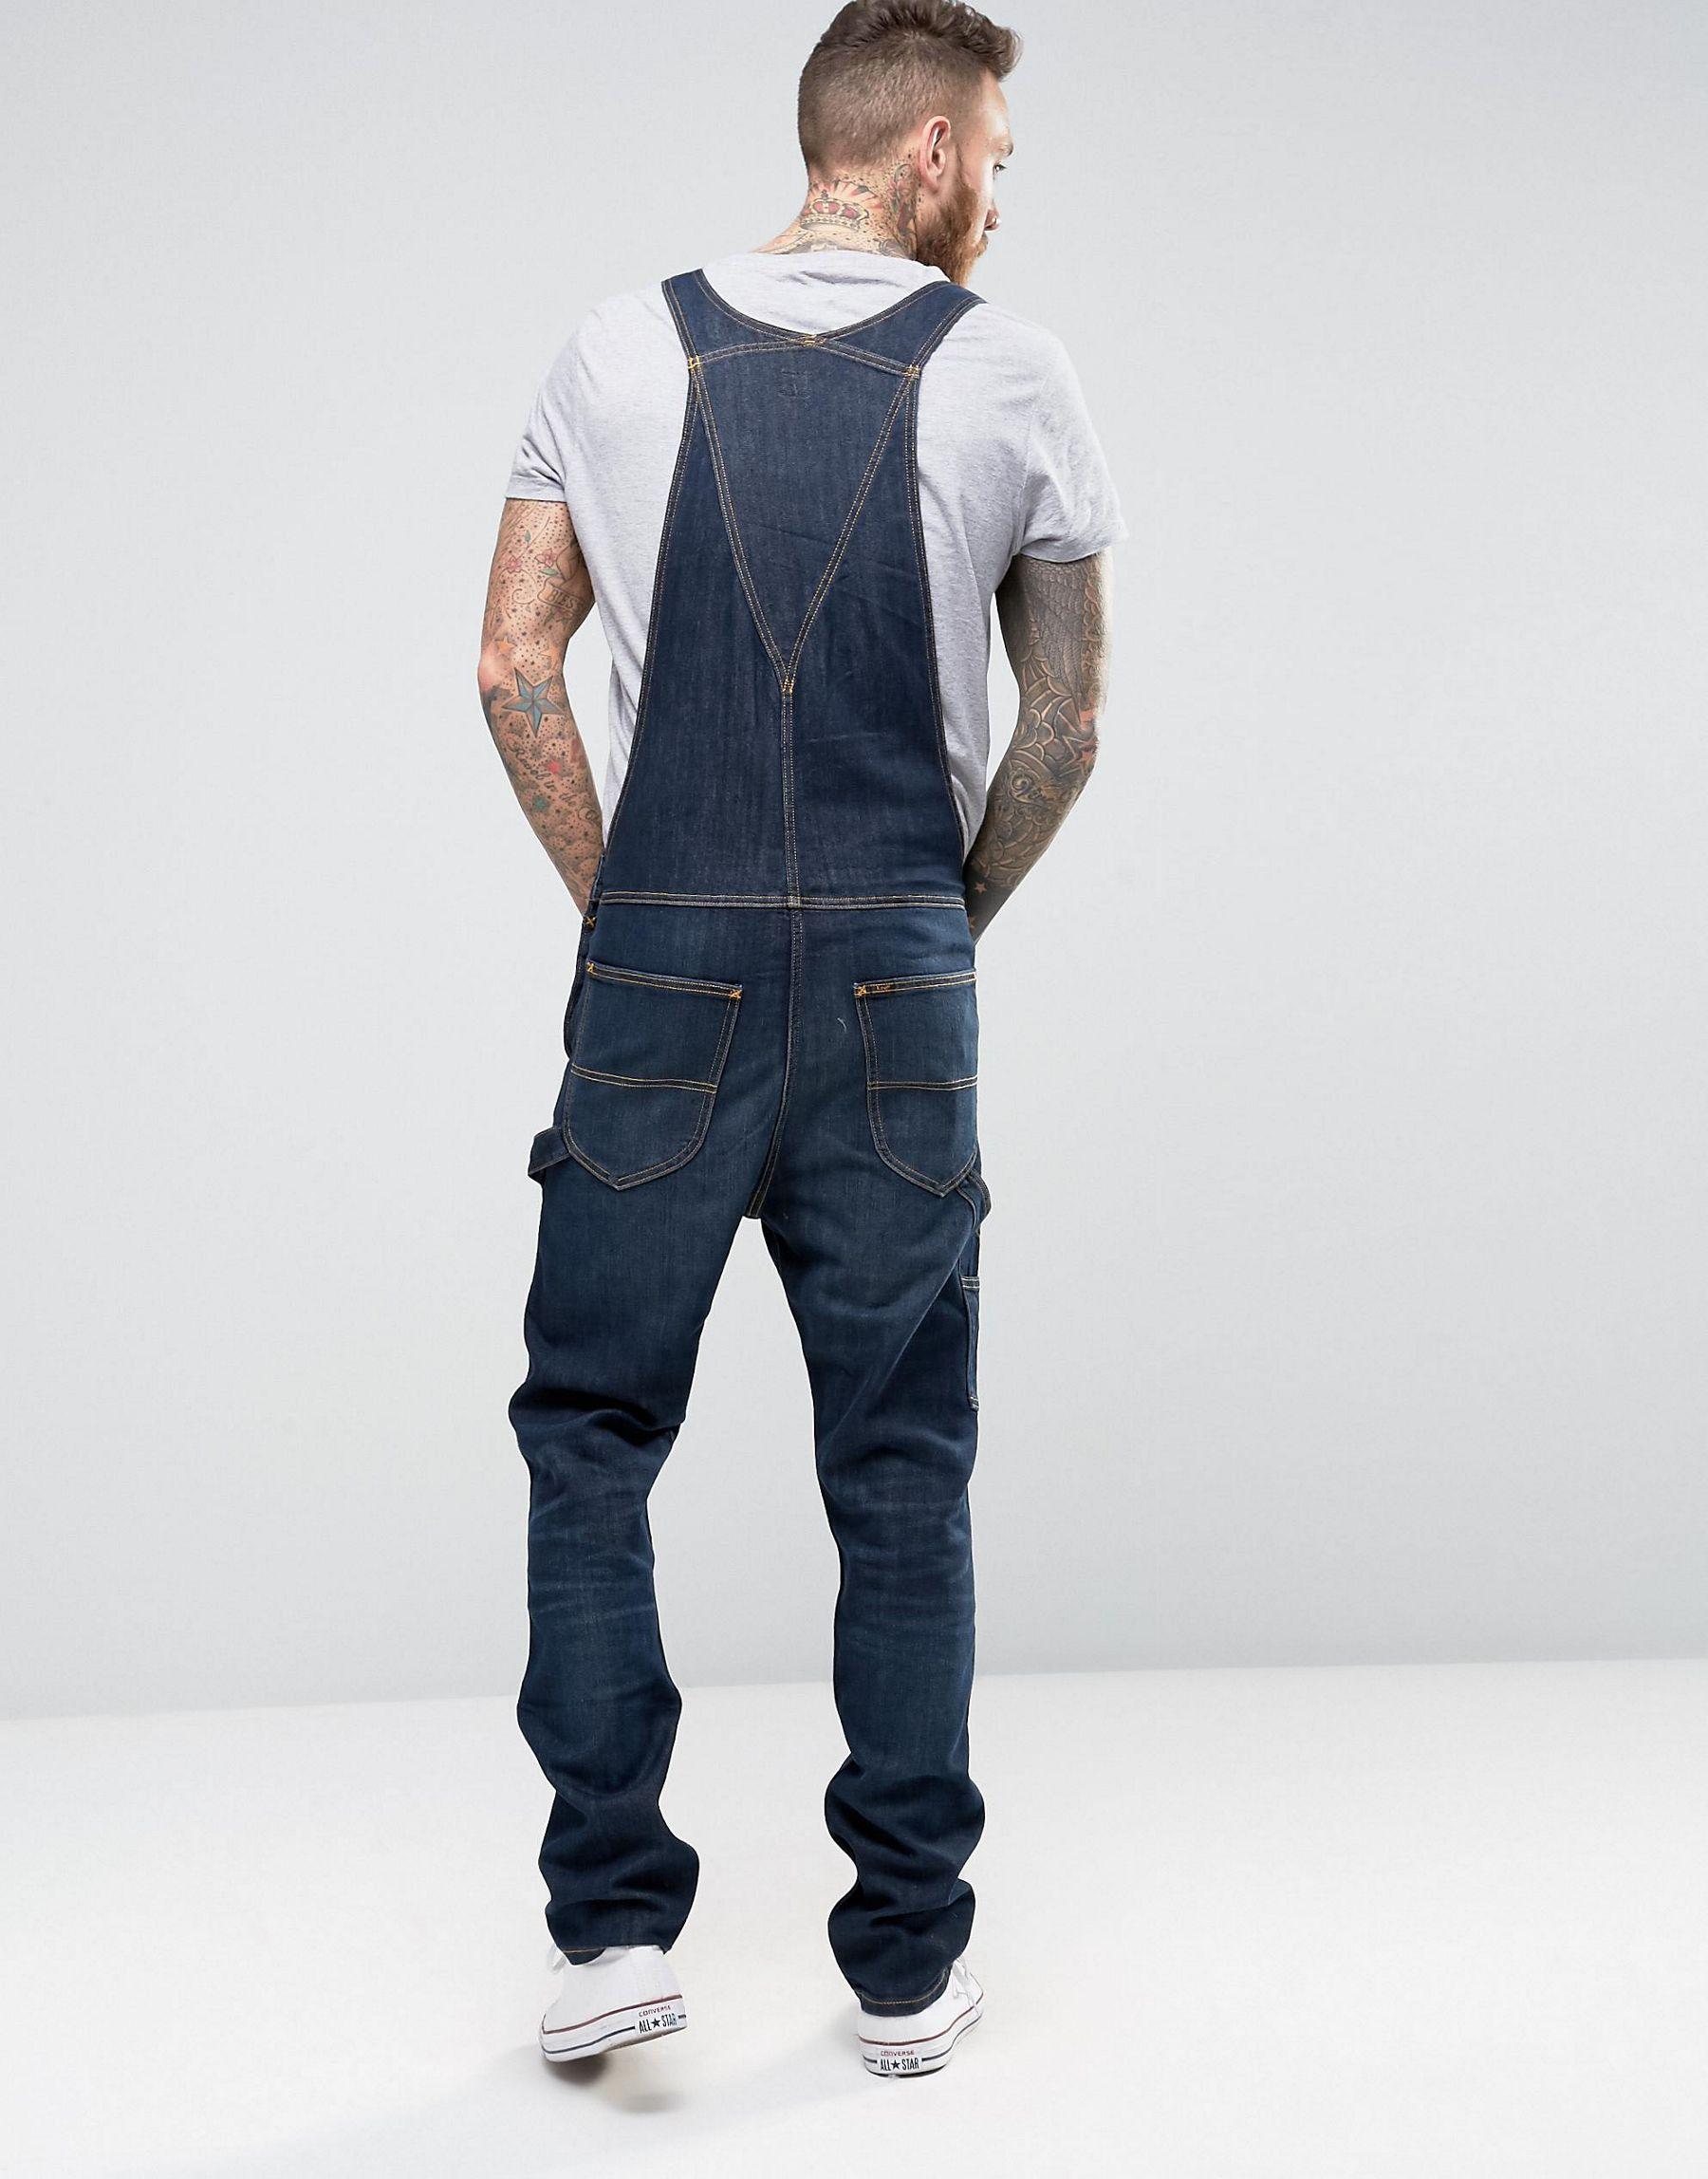 lee men's overall jeans